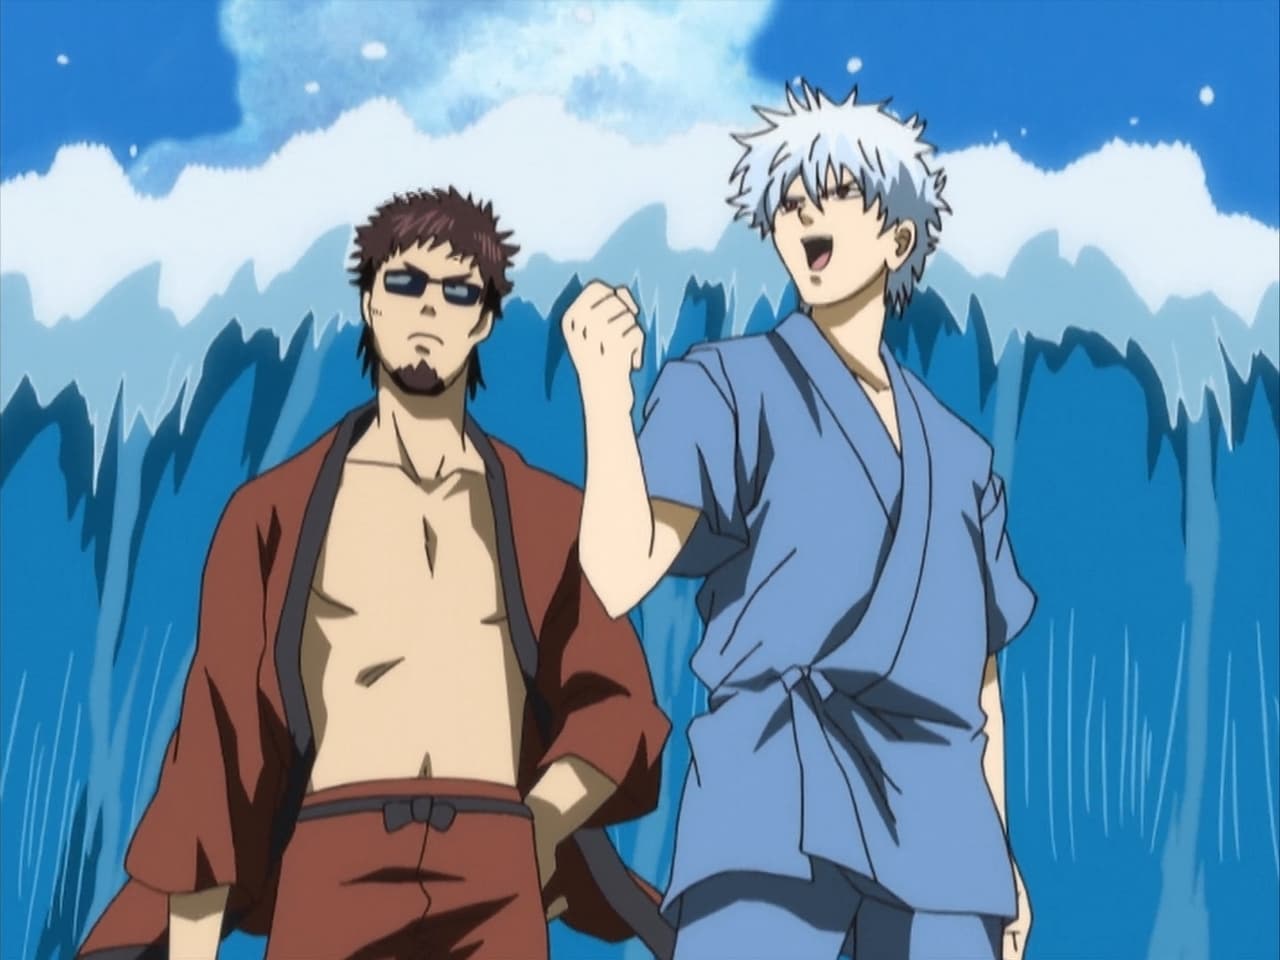 Gintama - Season 1 Episode 19 : Why is the Sea So Salty? Because You City Folk Pee Whenever You Go Swimming!